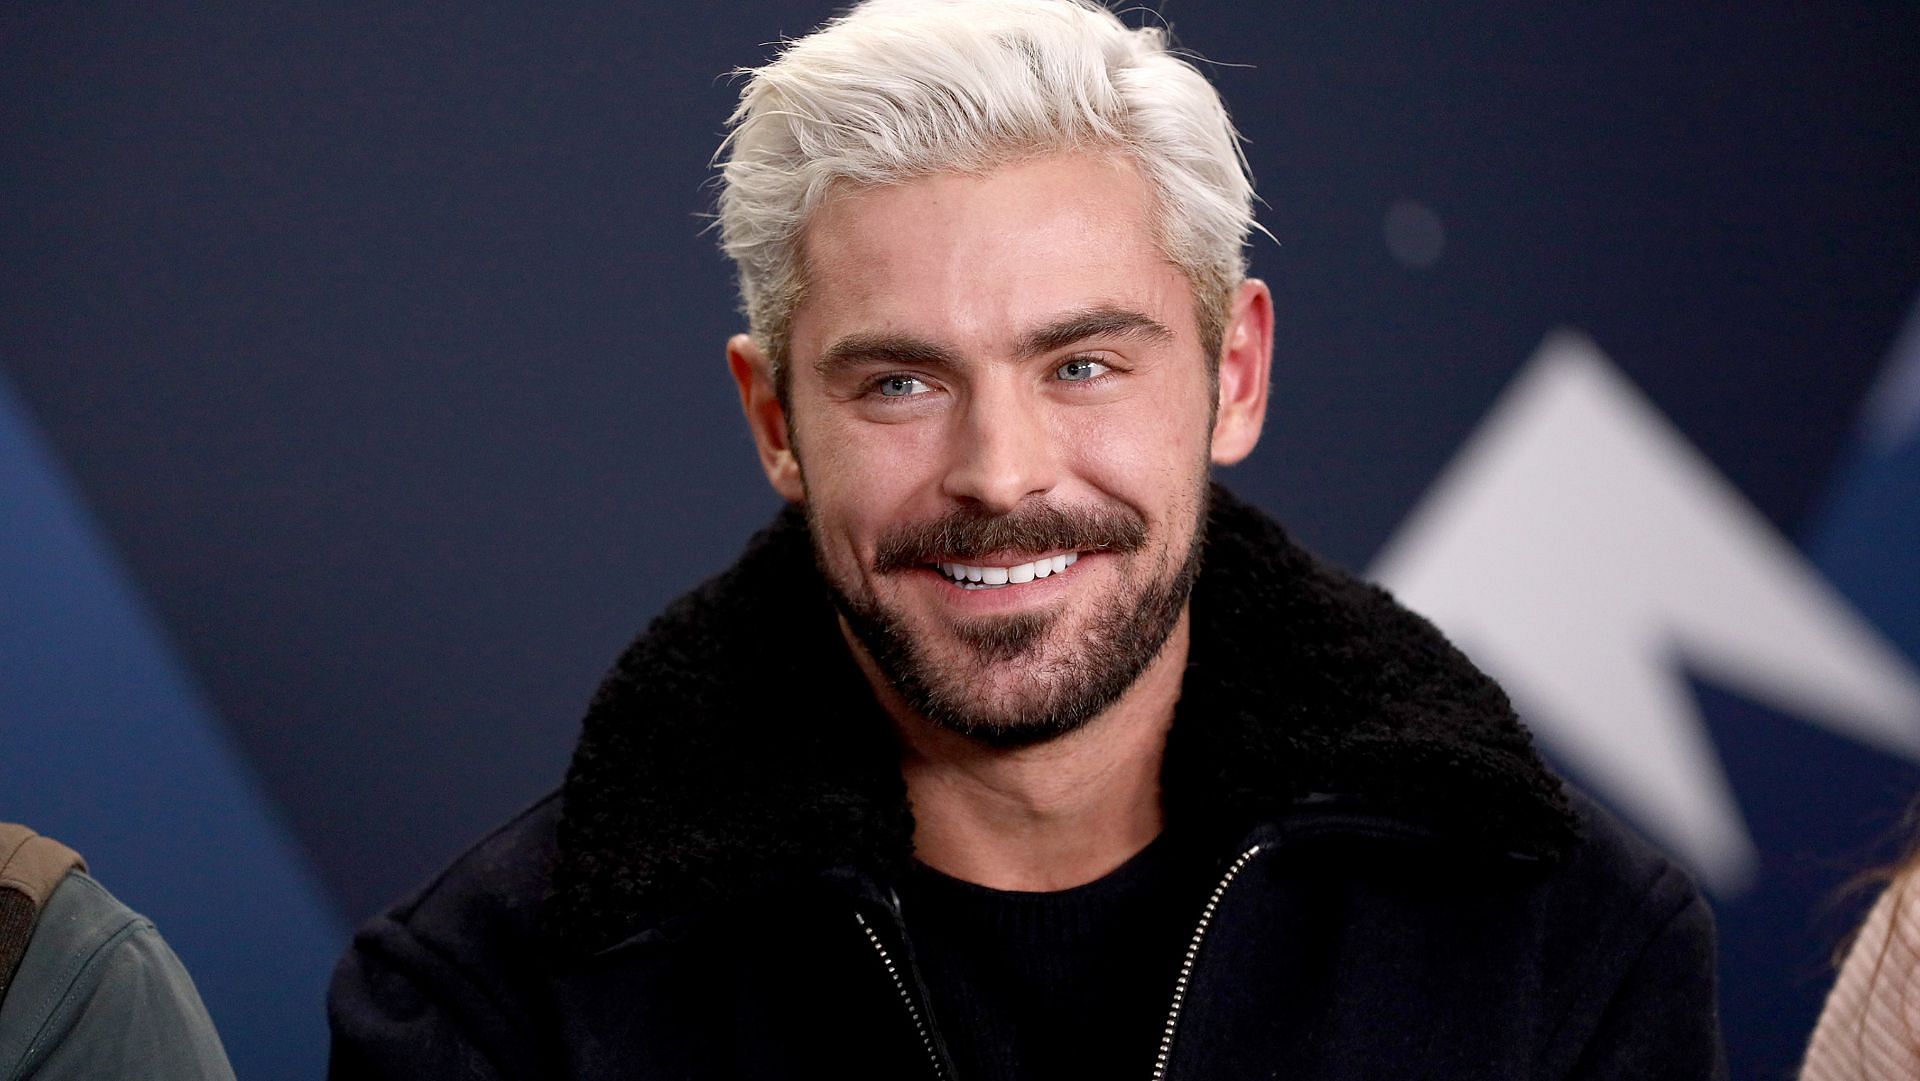 Contrary to rumors, Zac Efron did not have a plastic surgery on his jaw. (Image via Getty Images for IMDb)